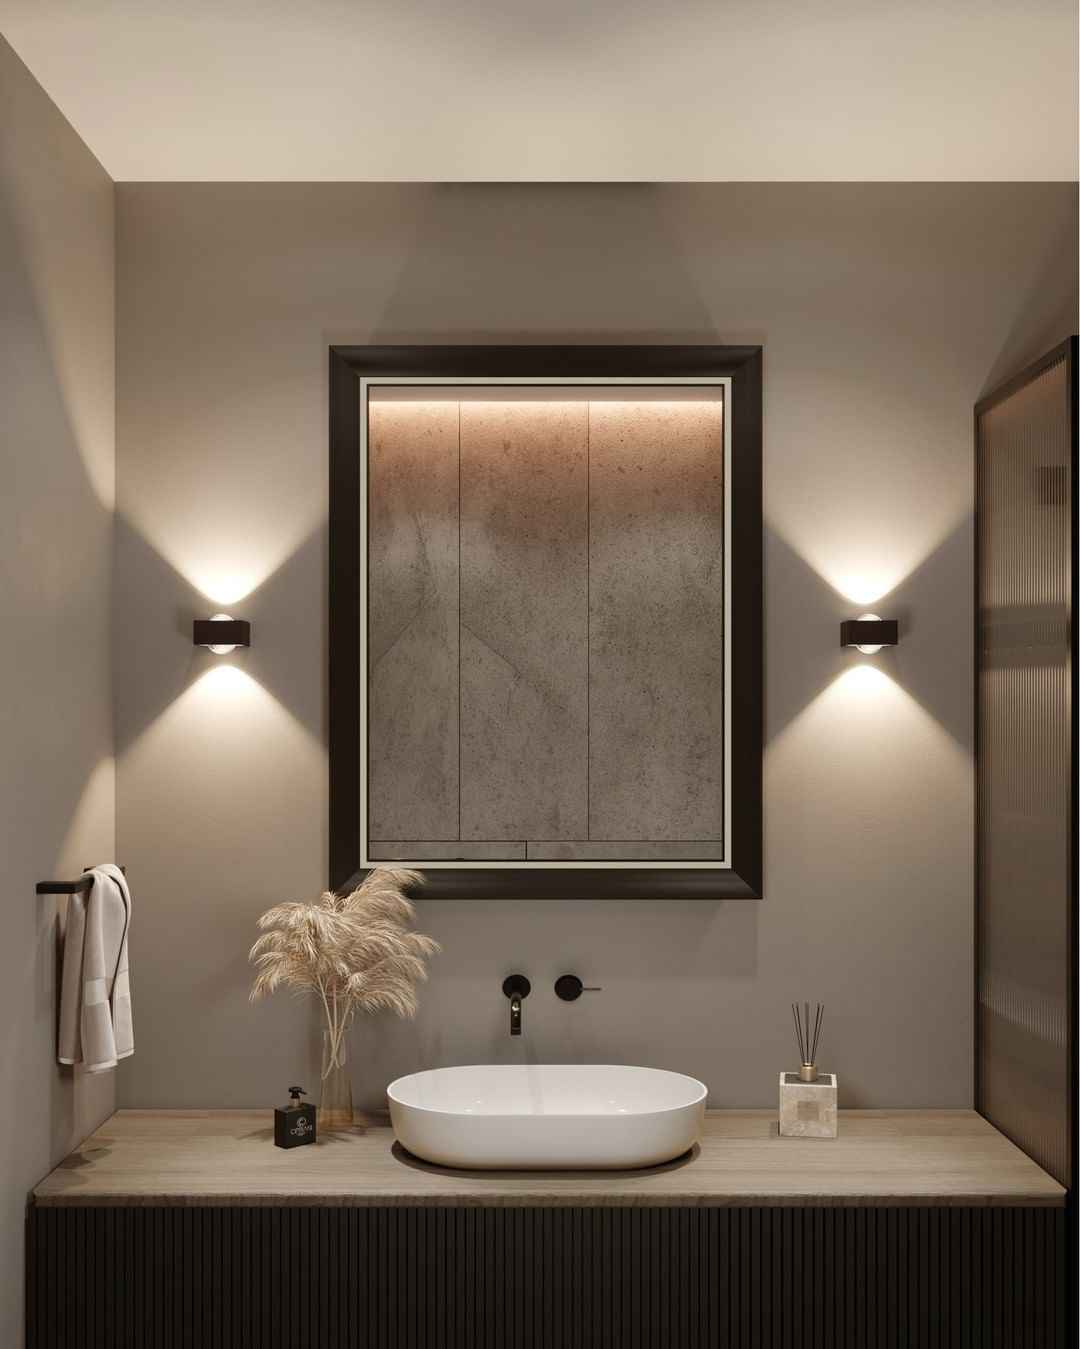 A bathroom scene with various top light lights and light mirrors